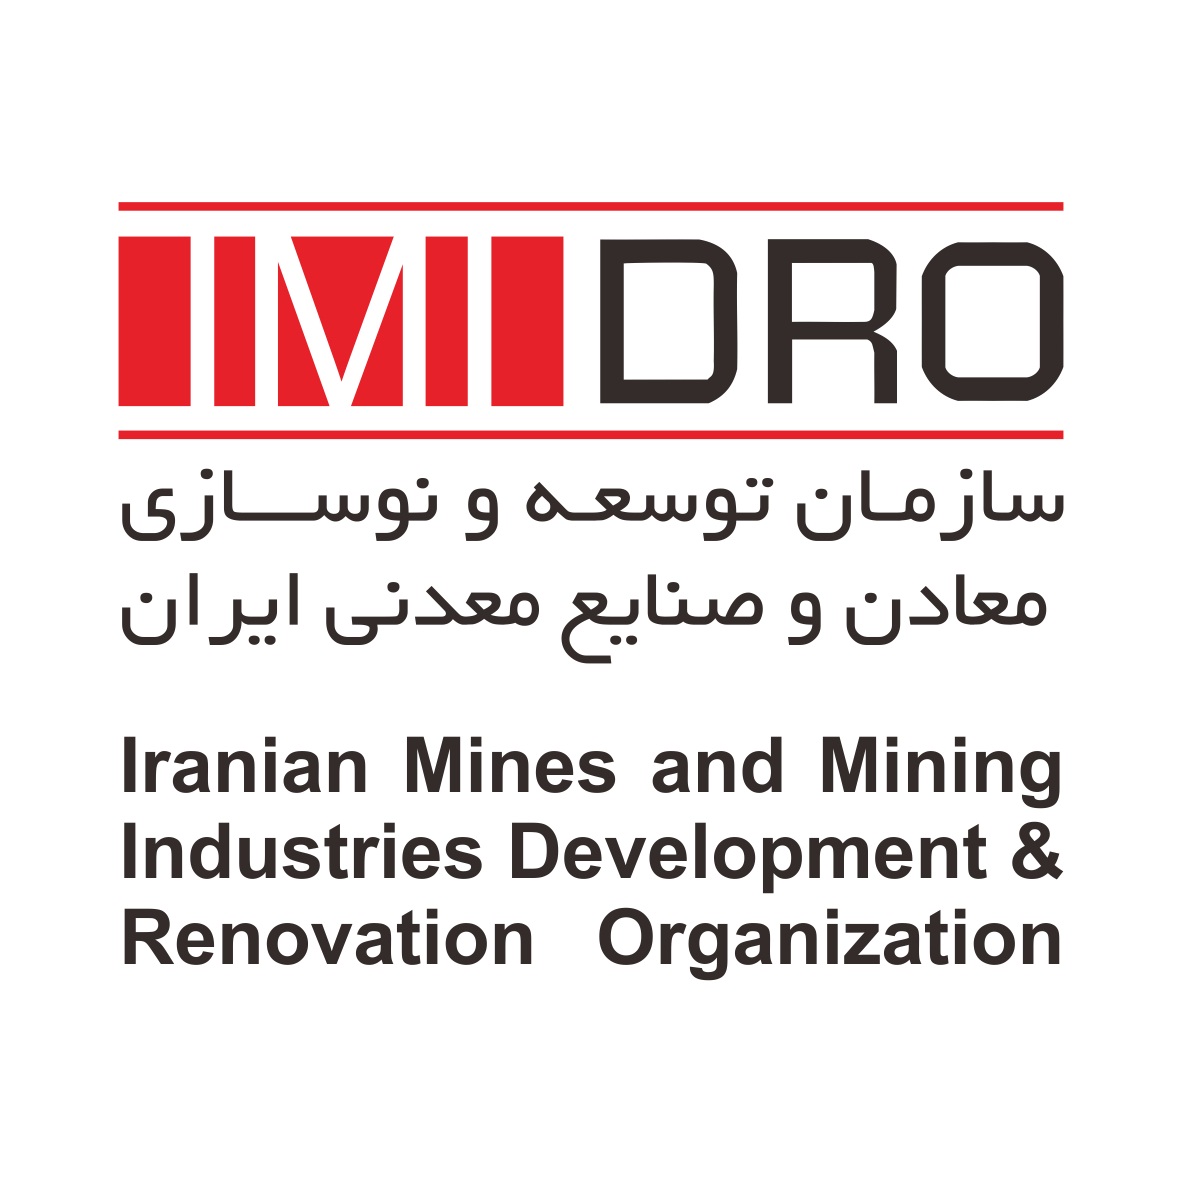 IMIDRO Won the Title of Top Research Project